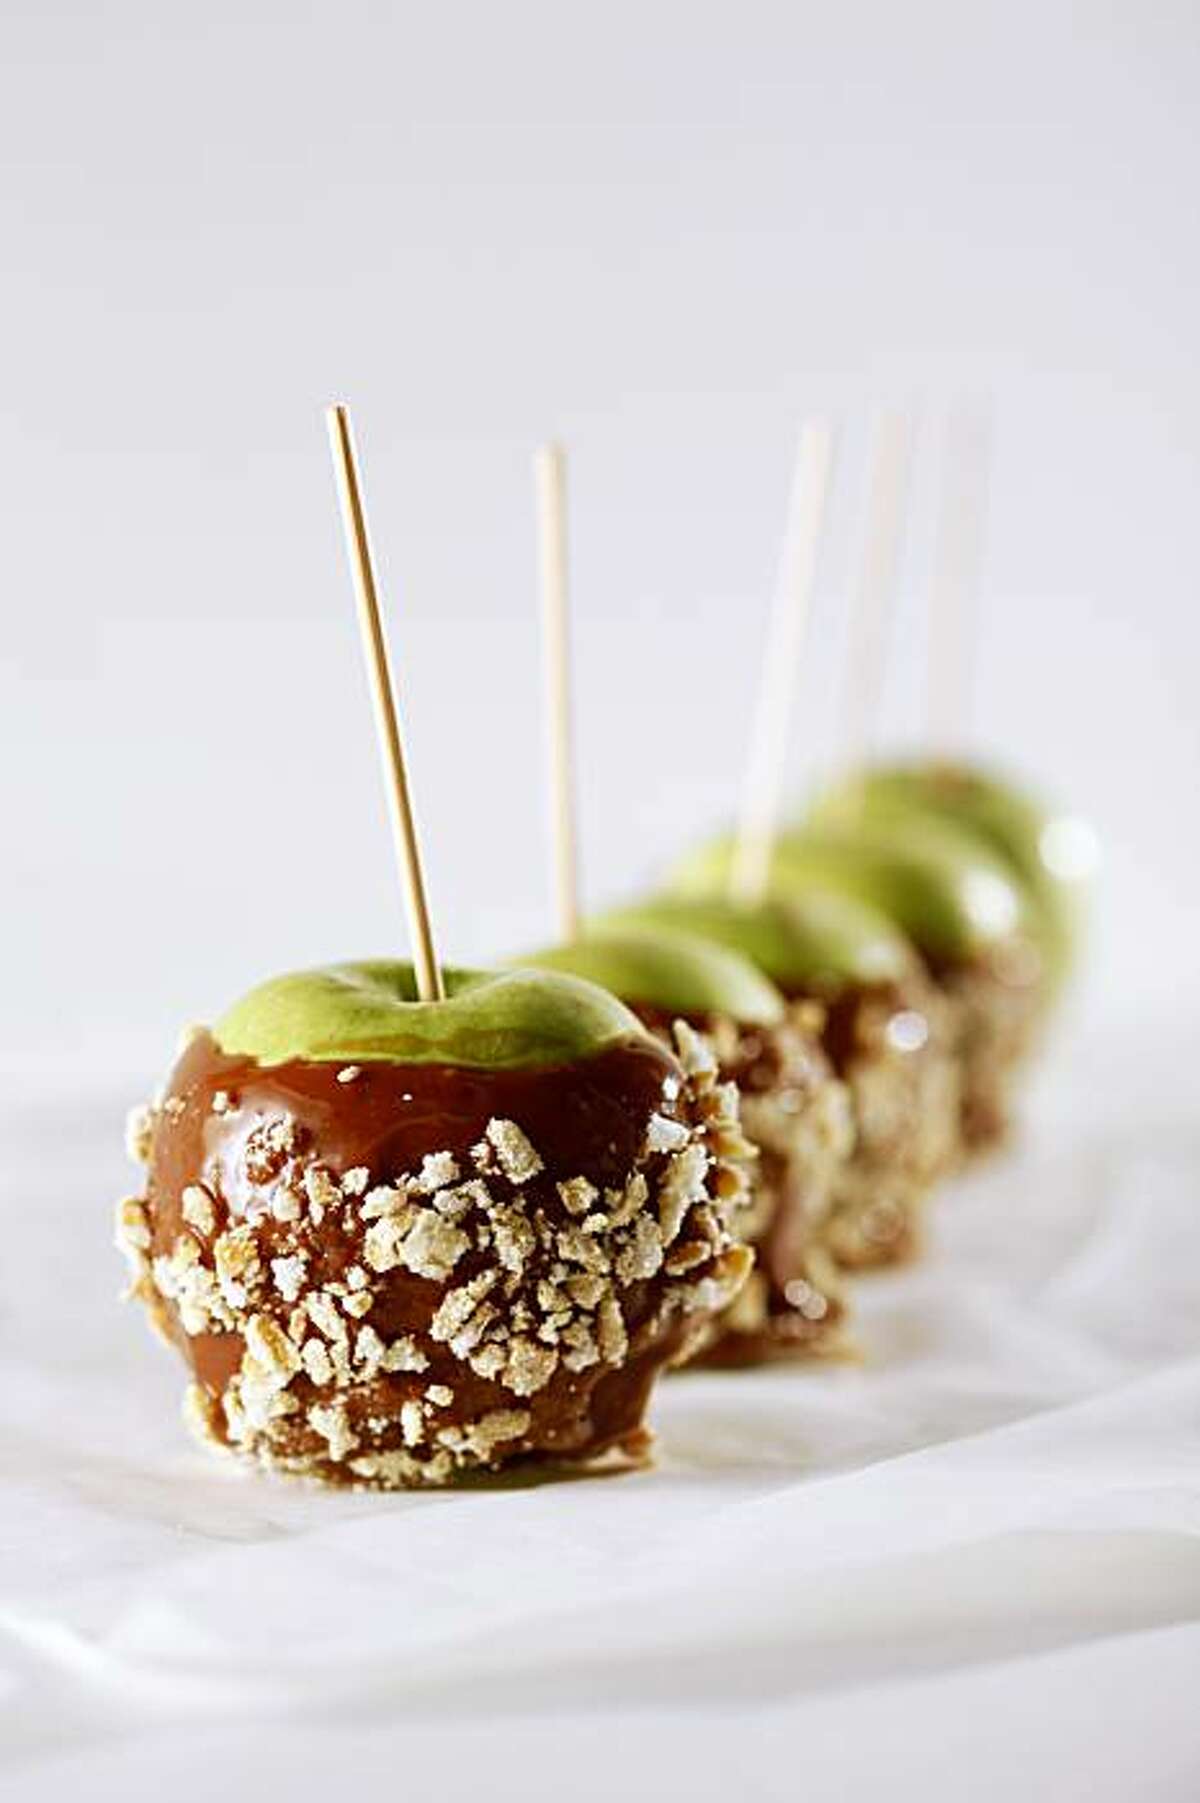 Honey Ginger Caramel Apples in San Francisco, Calif., on October 14, 2009. Food styled by Rachael Daylong.